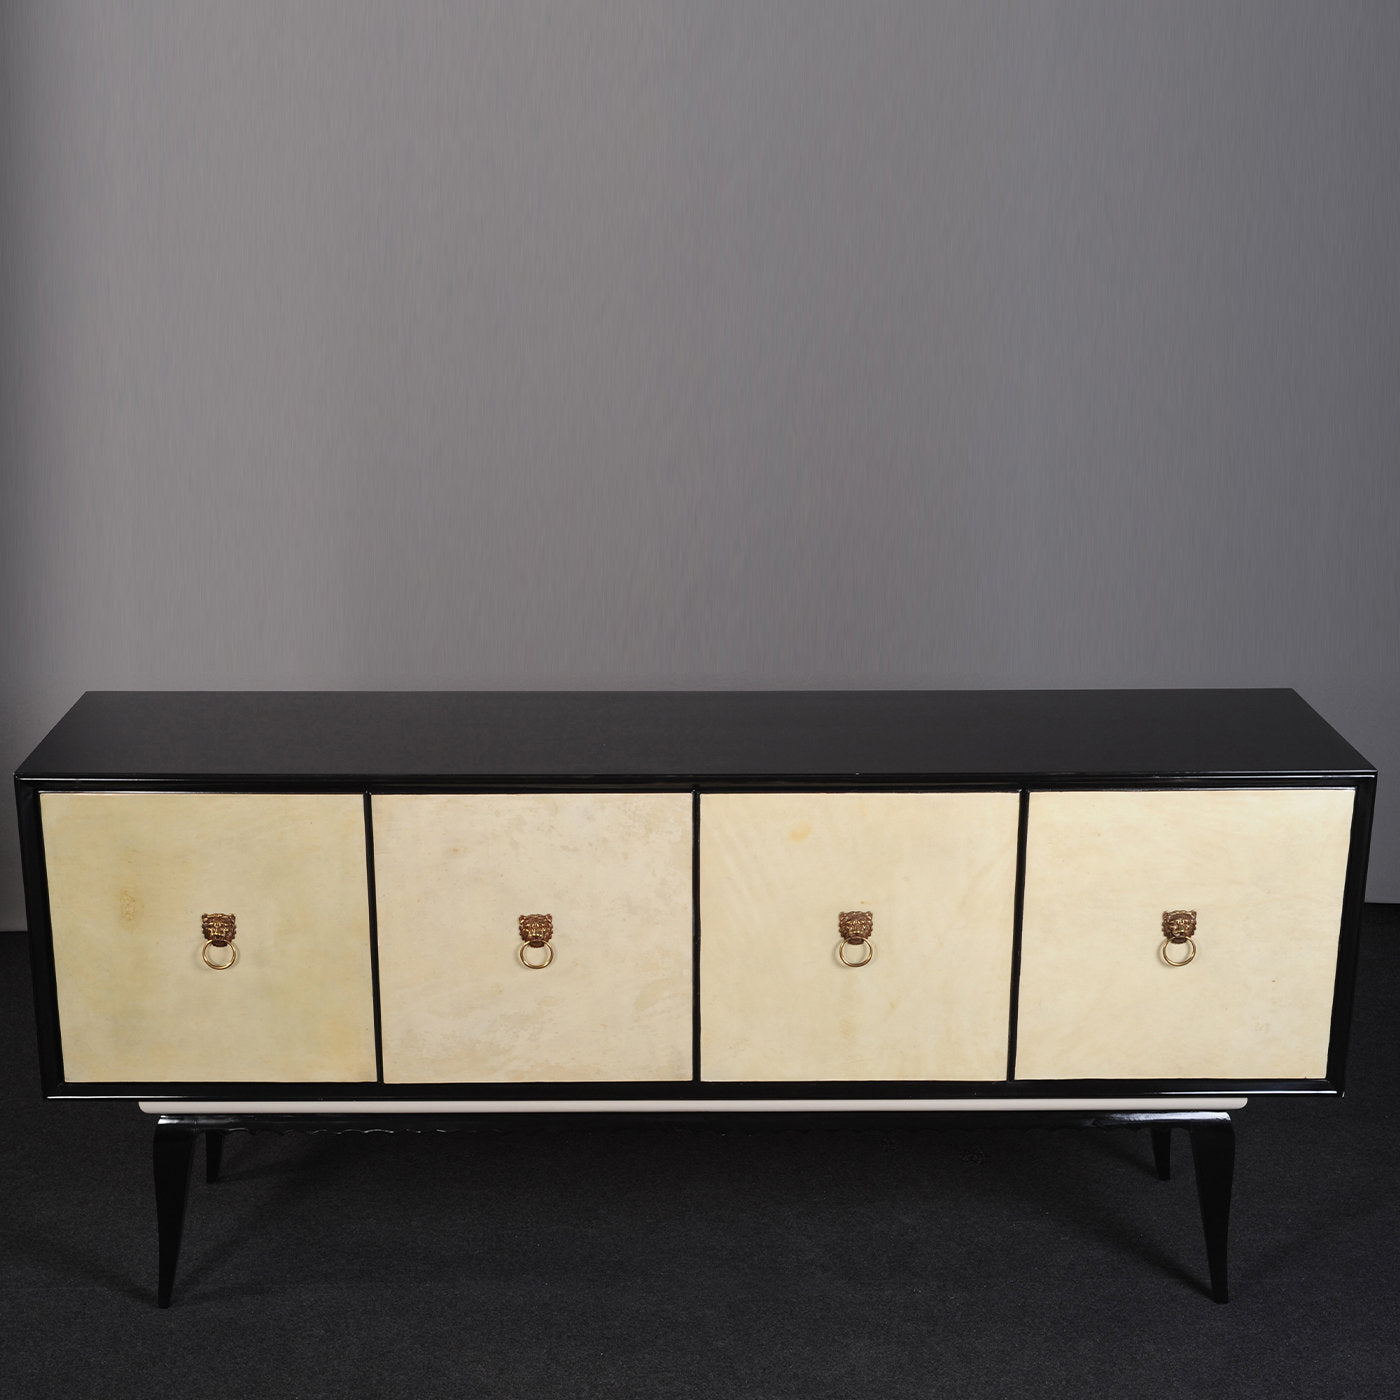 PLM-0004 Black and Ivory Parchment Sideboard - Alternative view 2